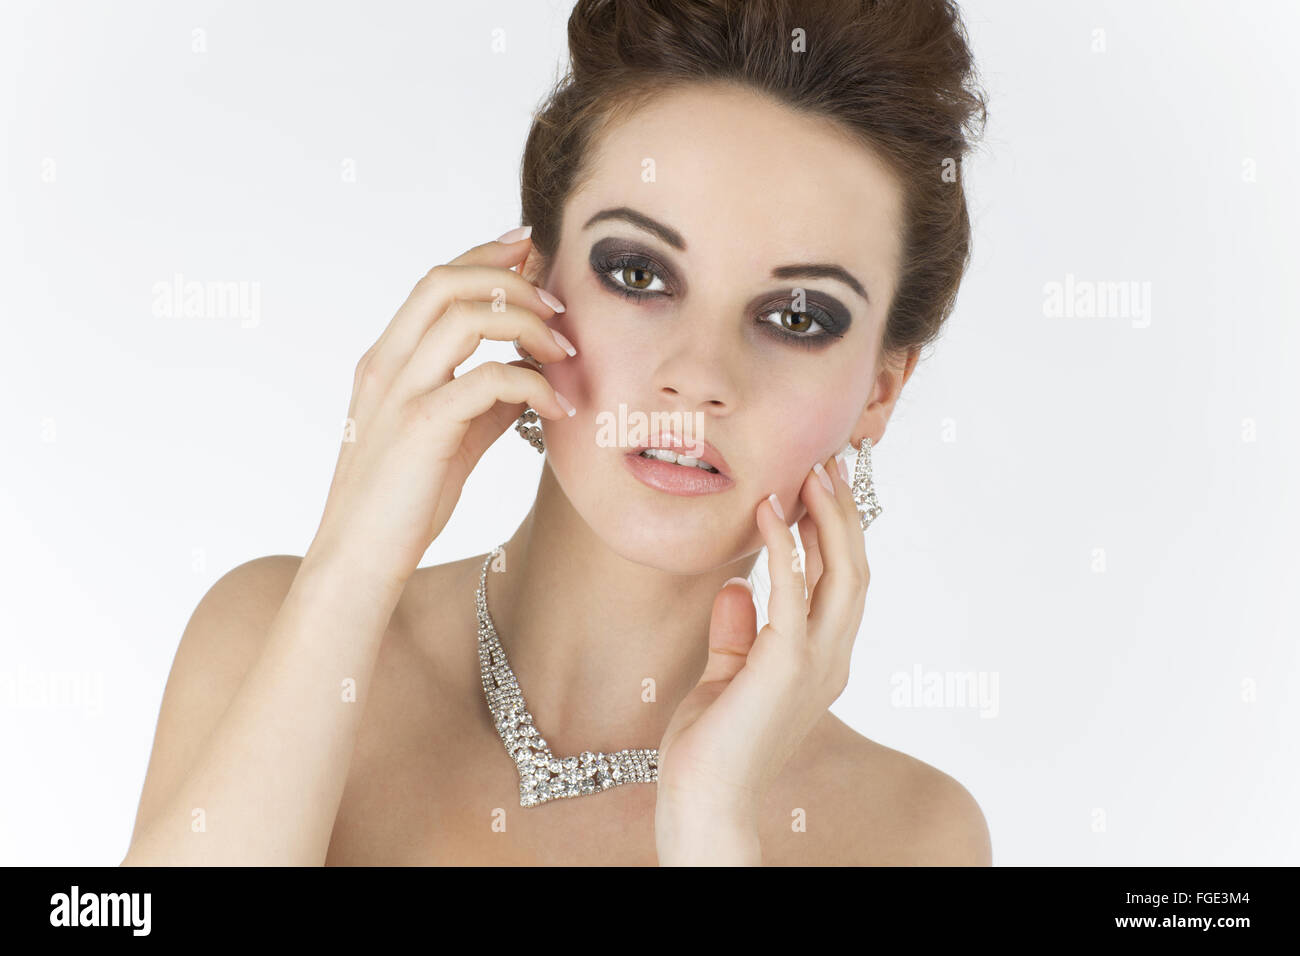 Young woman with jewelry, Portrait Stock Photo